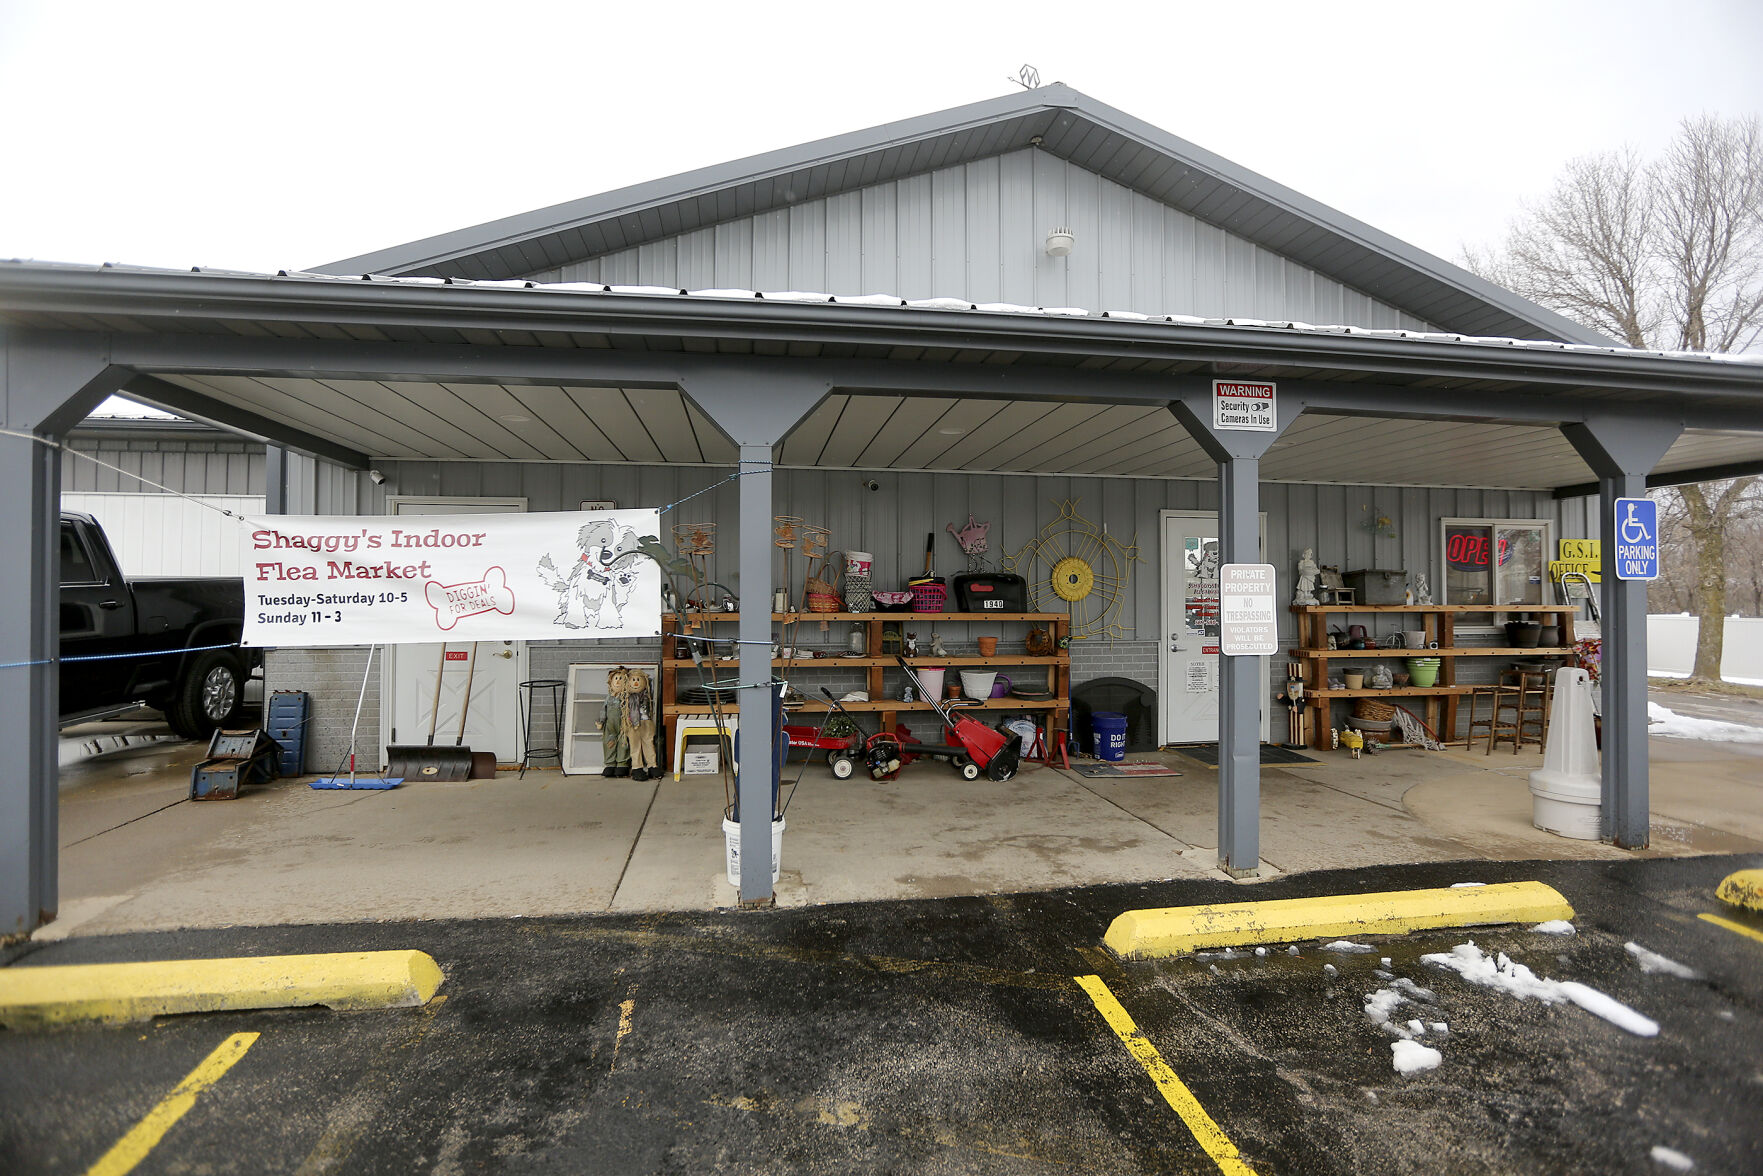 Shaggy’s Indoor Flea Market located at 175 North Crescent Ridge in Dubuque.    PHOTO CREDIT: Dave Kettering